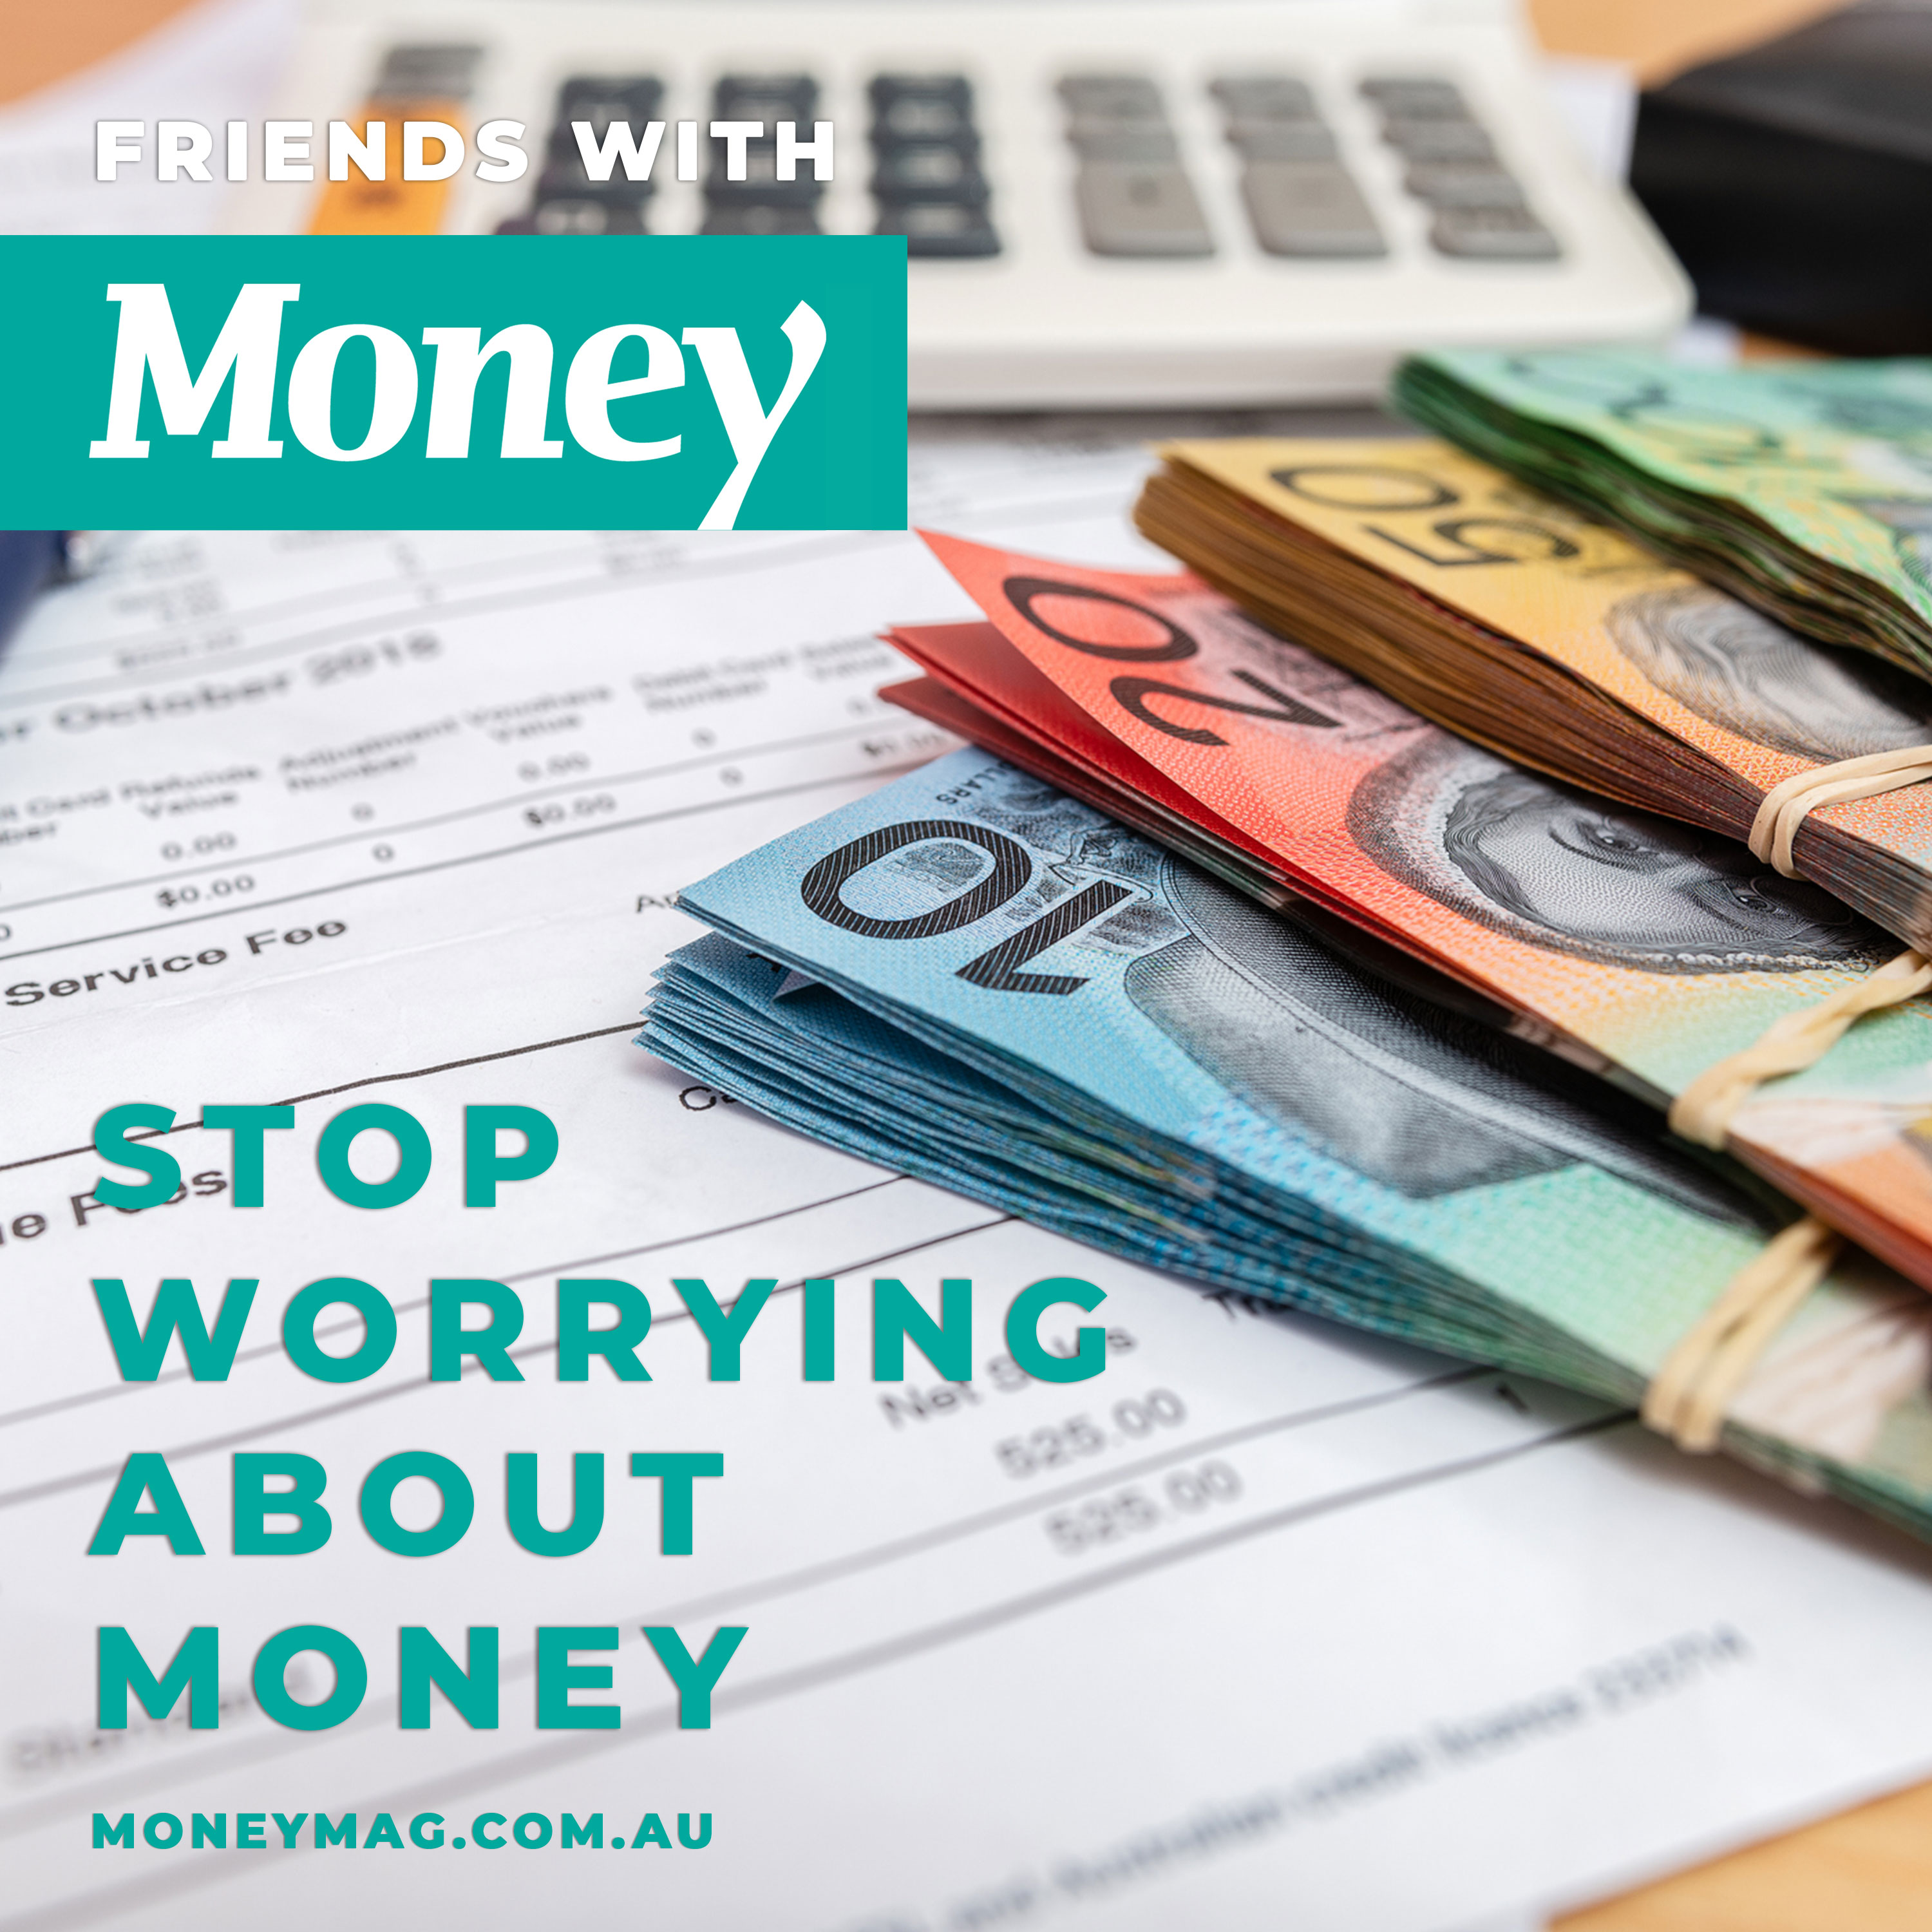 Stop worrying about money